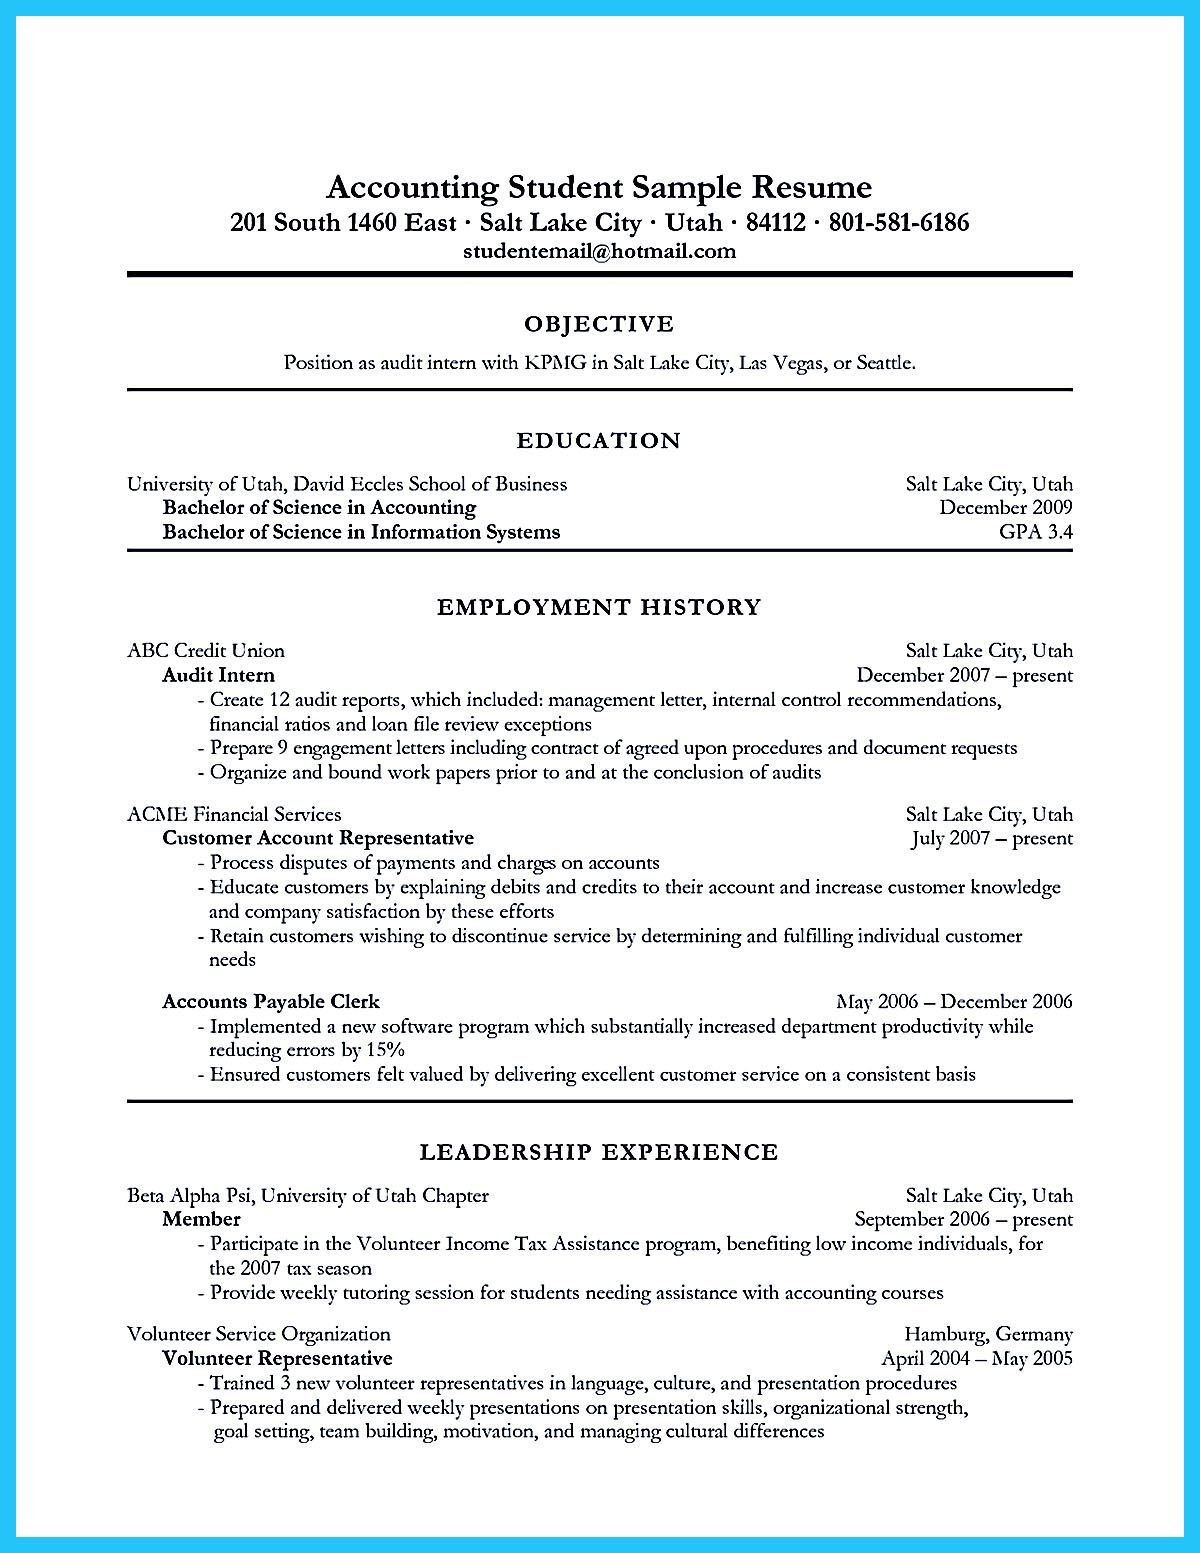 Sample Resume for Fresh Accounting Graduate without Experience Awesome Accounting Student Resume with No Experience Resume …